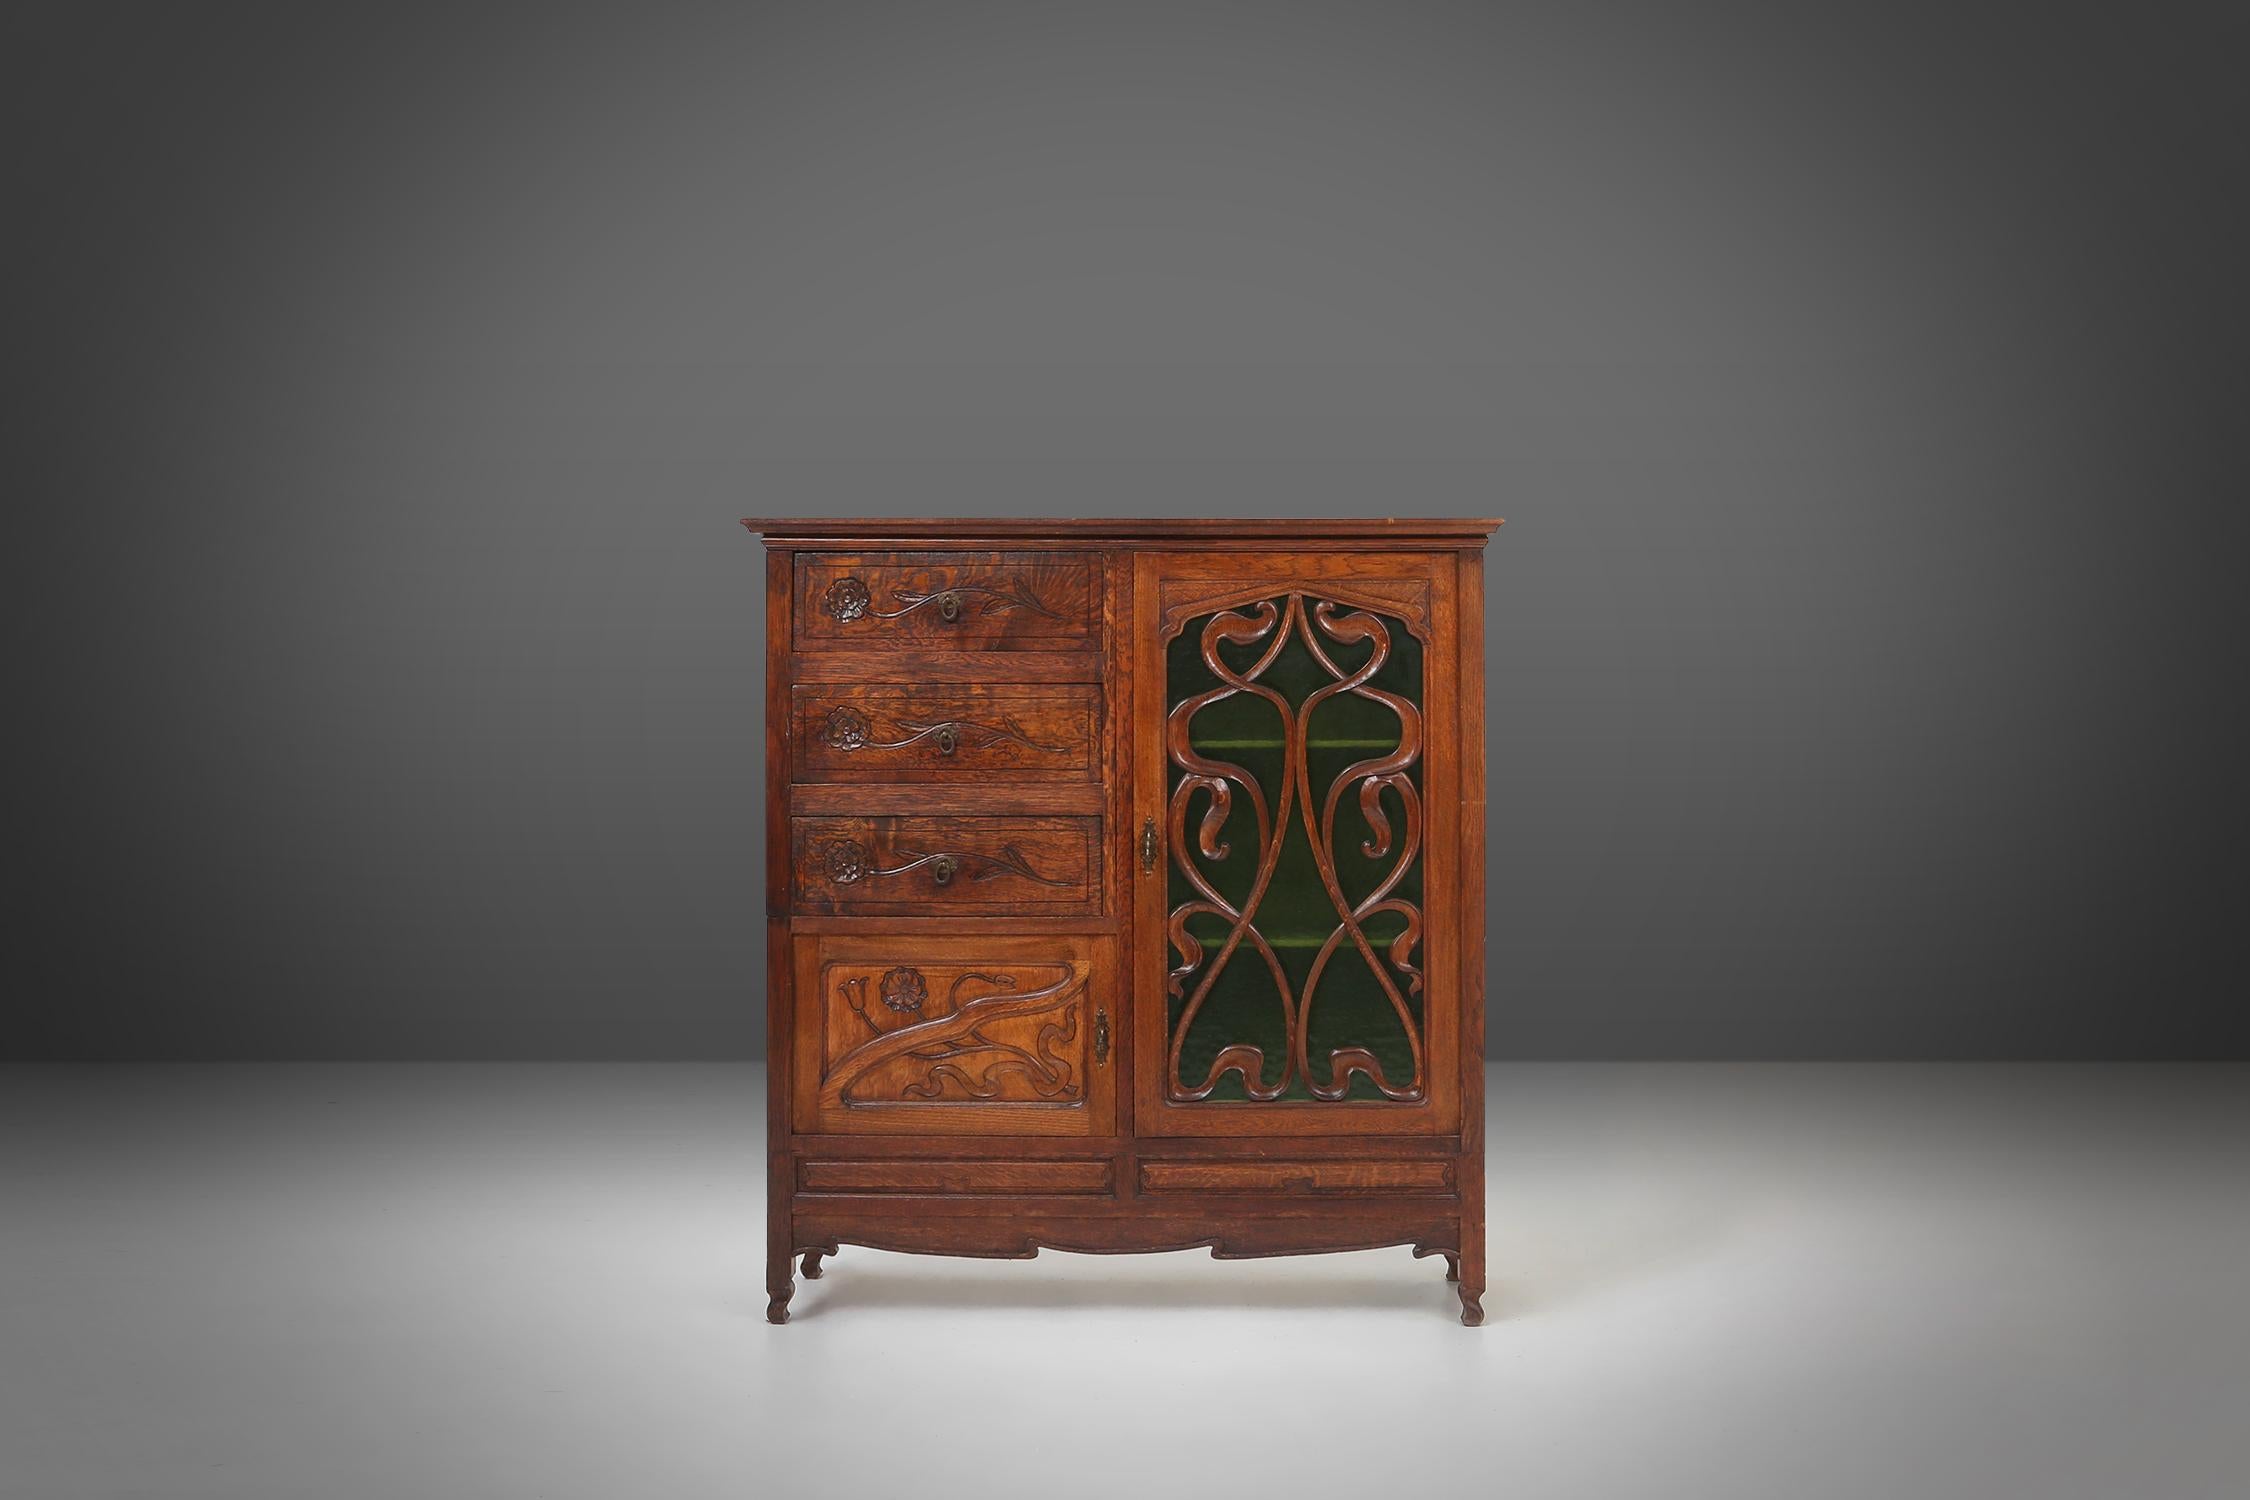 France / 1910 / cabinet / oak and green glass / Art Nouveau

Remarkable French cabinet with typical art nouveau floral decoration and green glass door. The cabinet distinguishes itself with striking design and rich luxurious carved decoration in